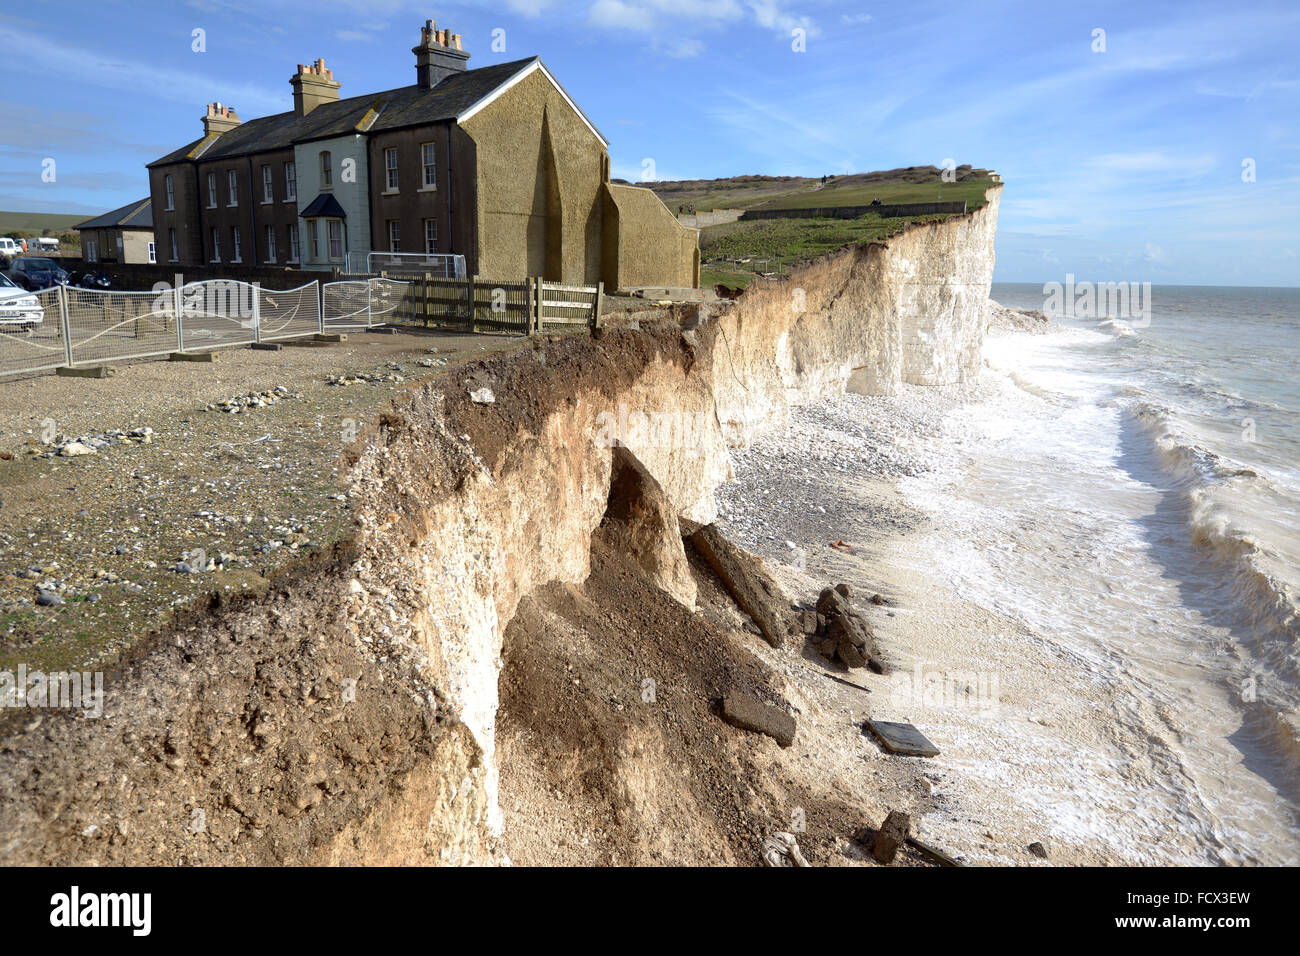 Demolition of Coastguard cottage at Birlng Gap, East Sussex, UK after winter storms eroded the chalk cliffs causing collapse Stock Photo